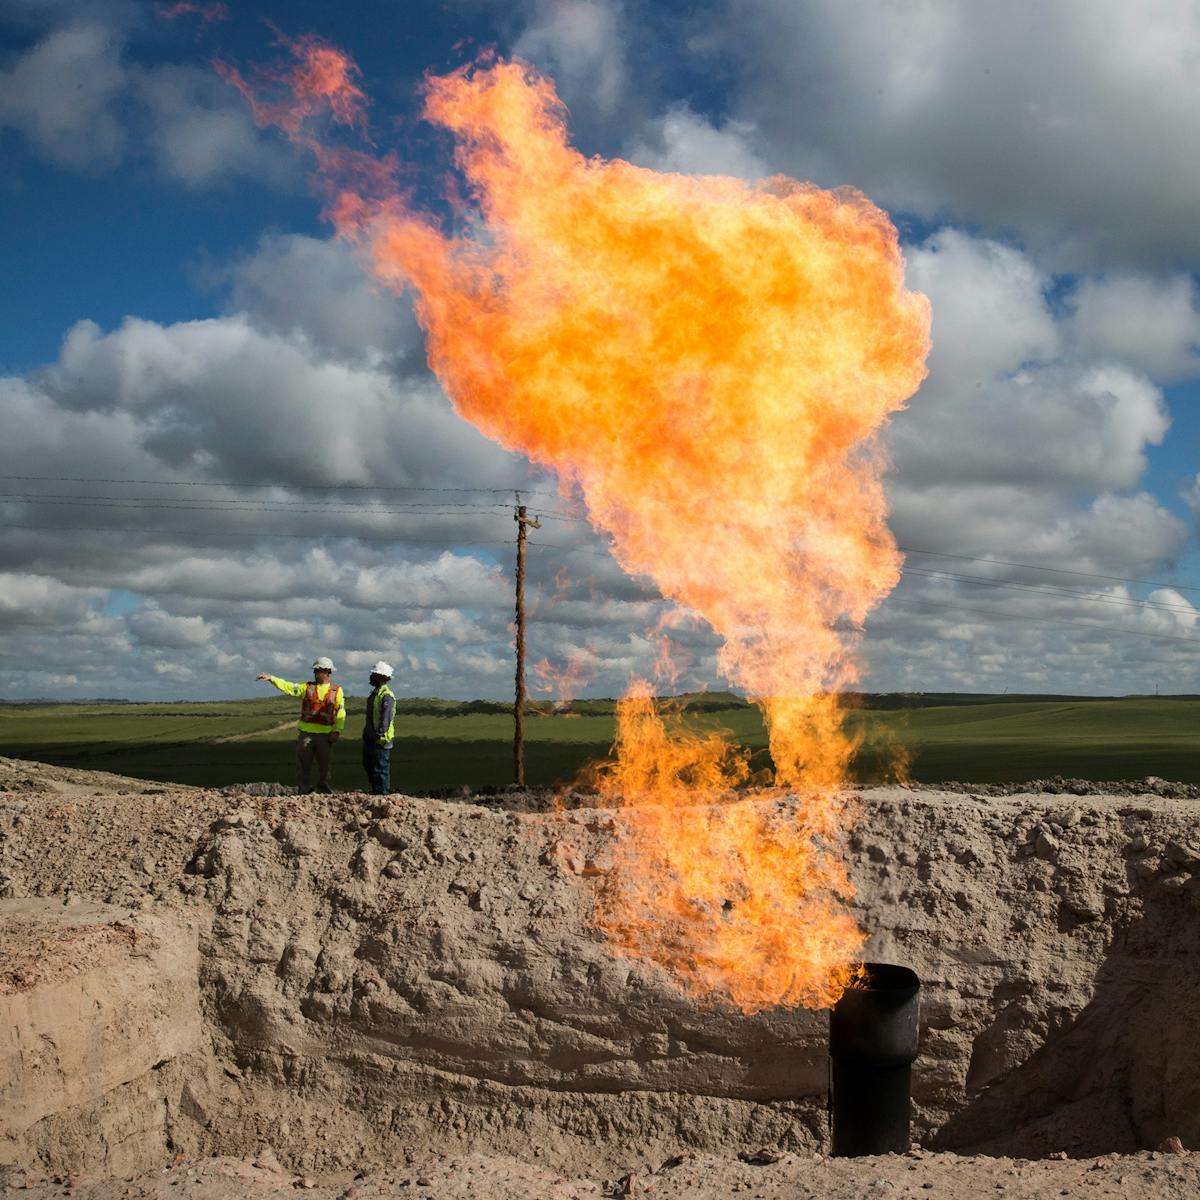 Routine gas flaring is wasteful, polluting and undermeasured